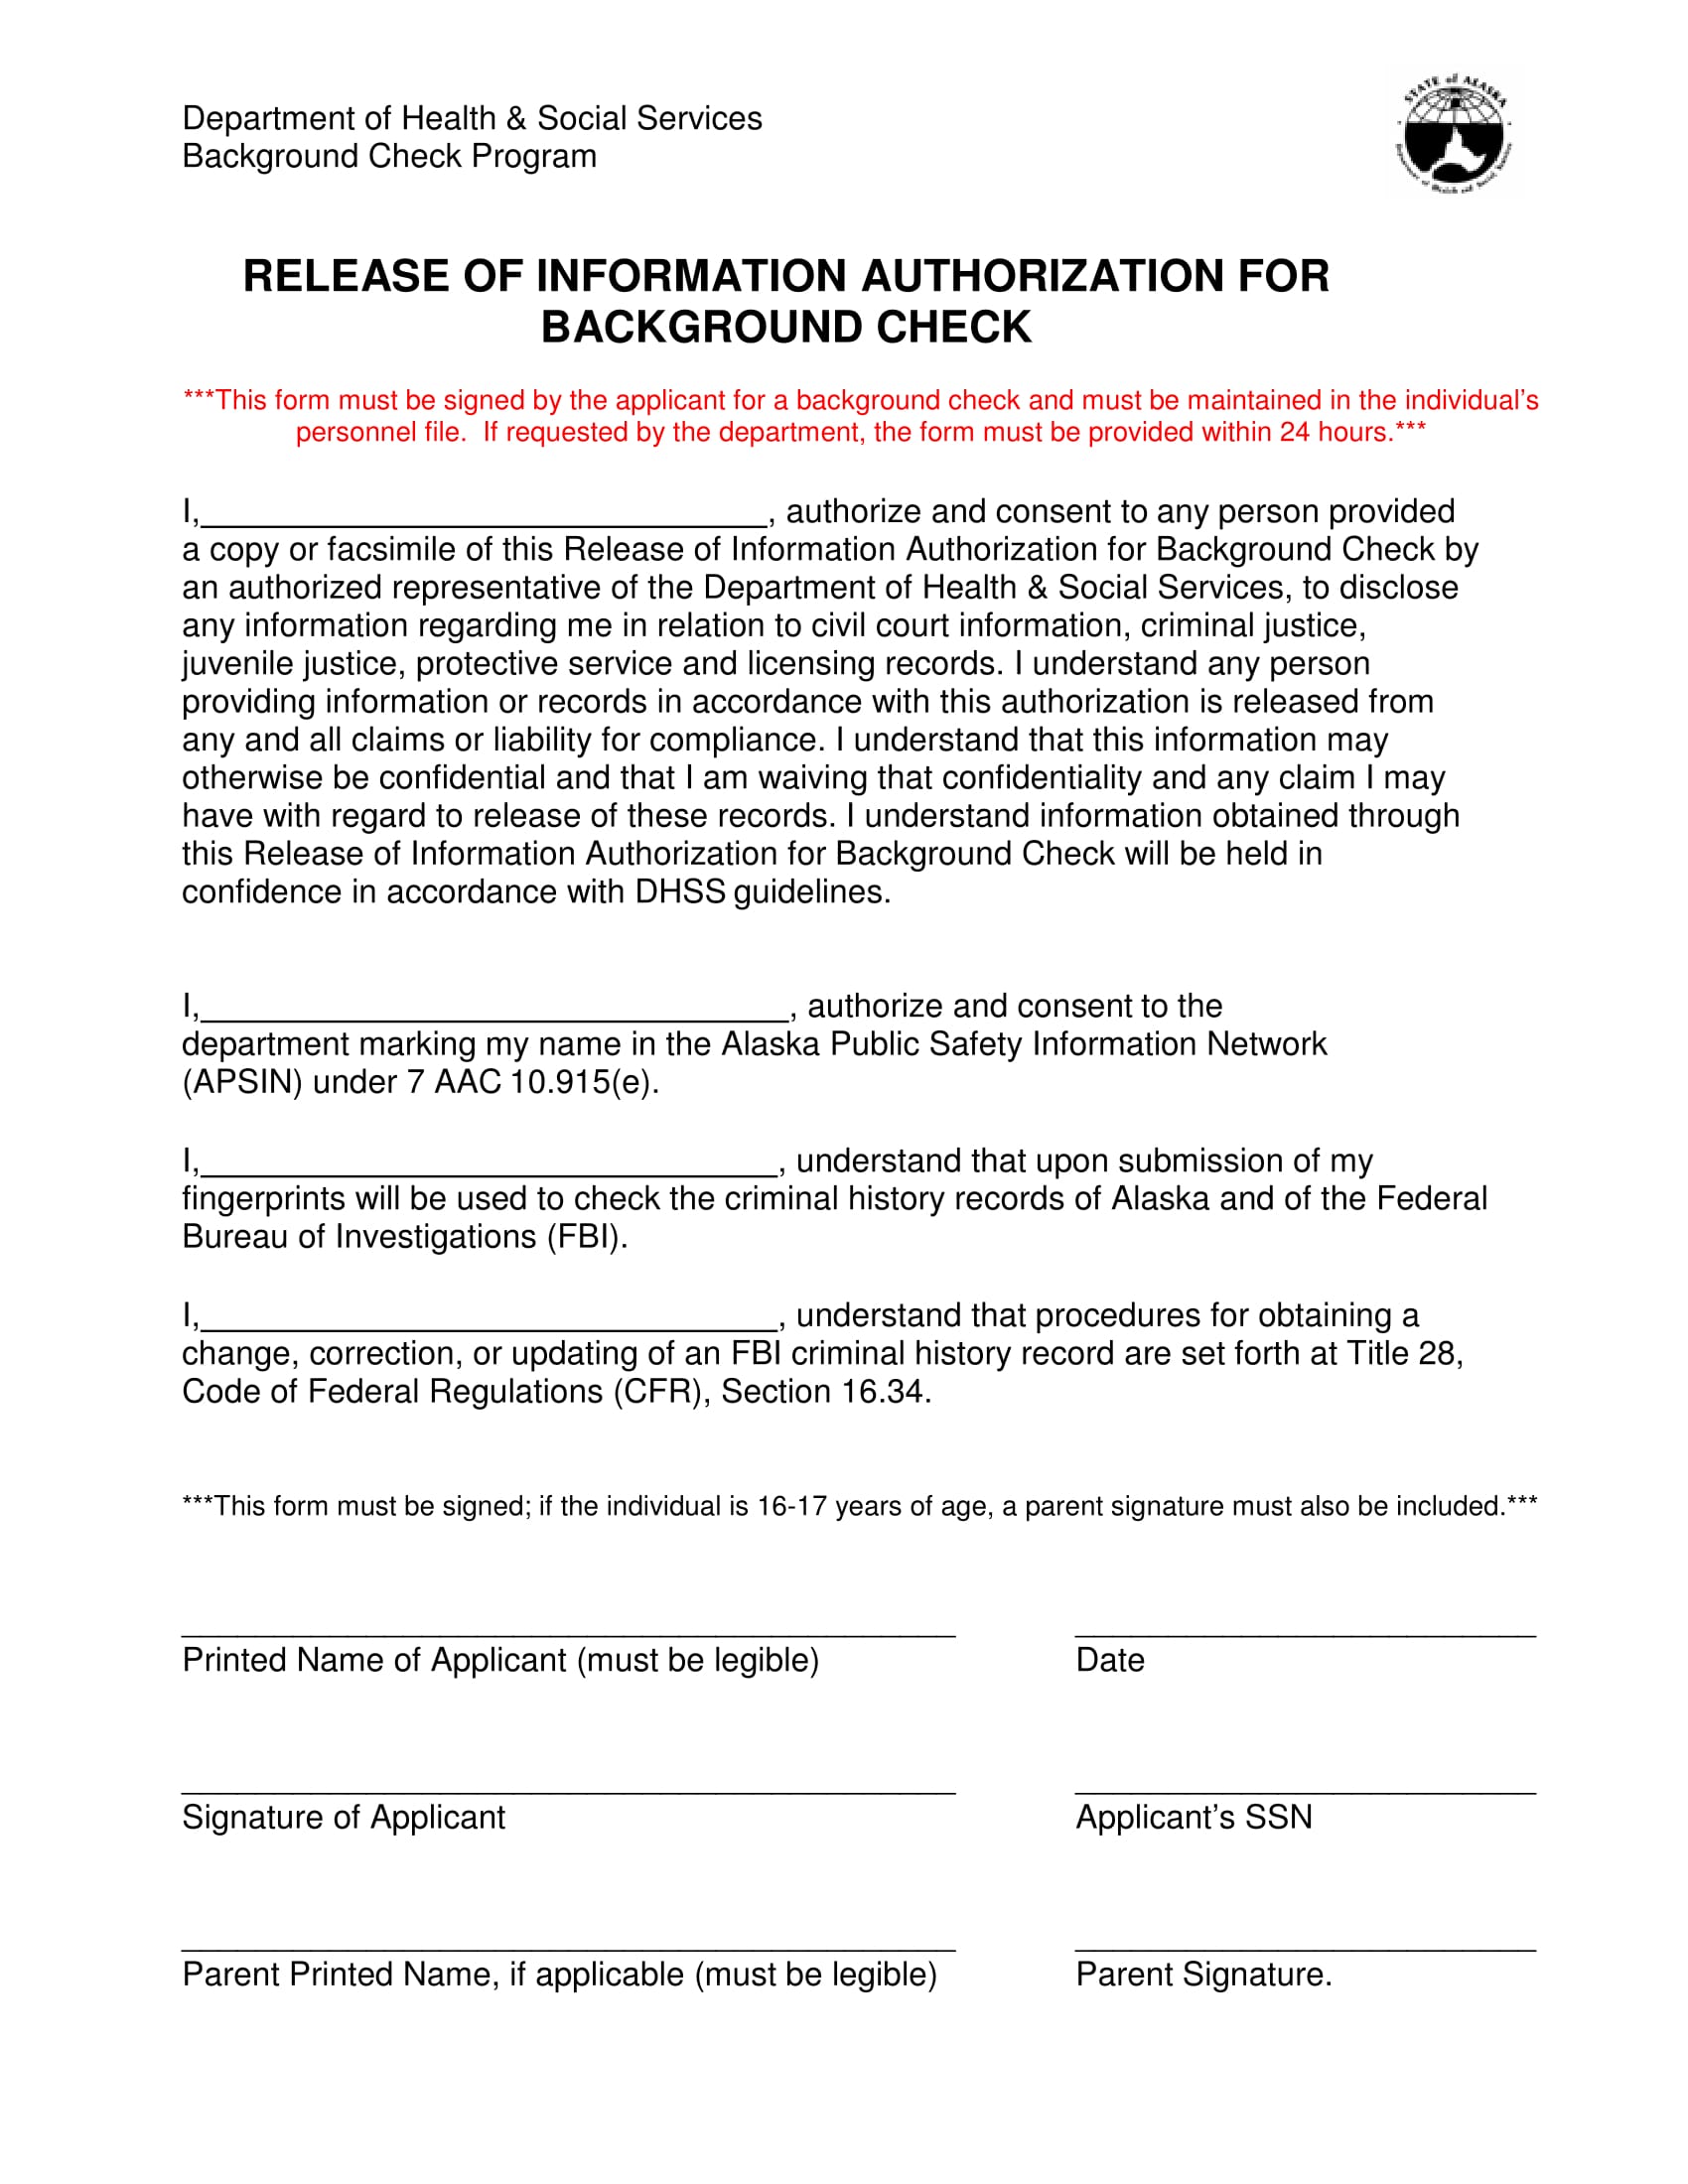 background release of information form 1